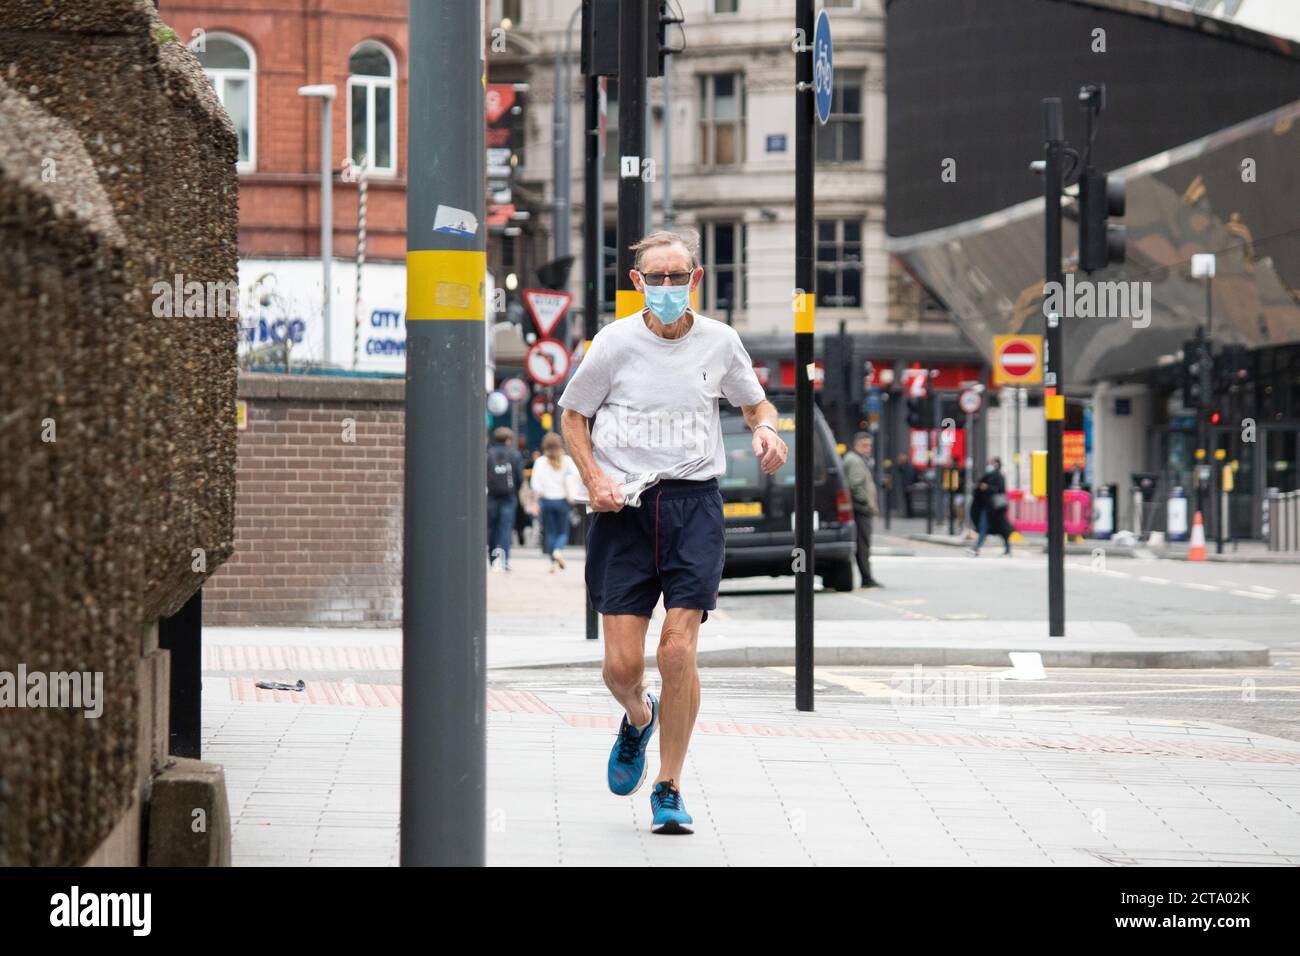 Picture taken on the day Coronavirus restrictions were implemented in Birmingham. Pictured a jogger wearing a face covering in Navigation Street, Birmingham. Stock Photo